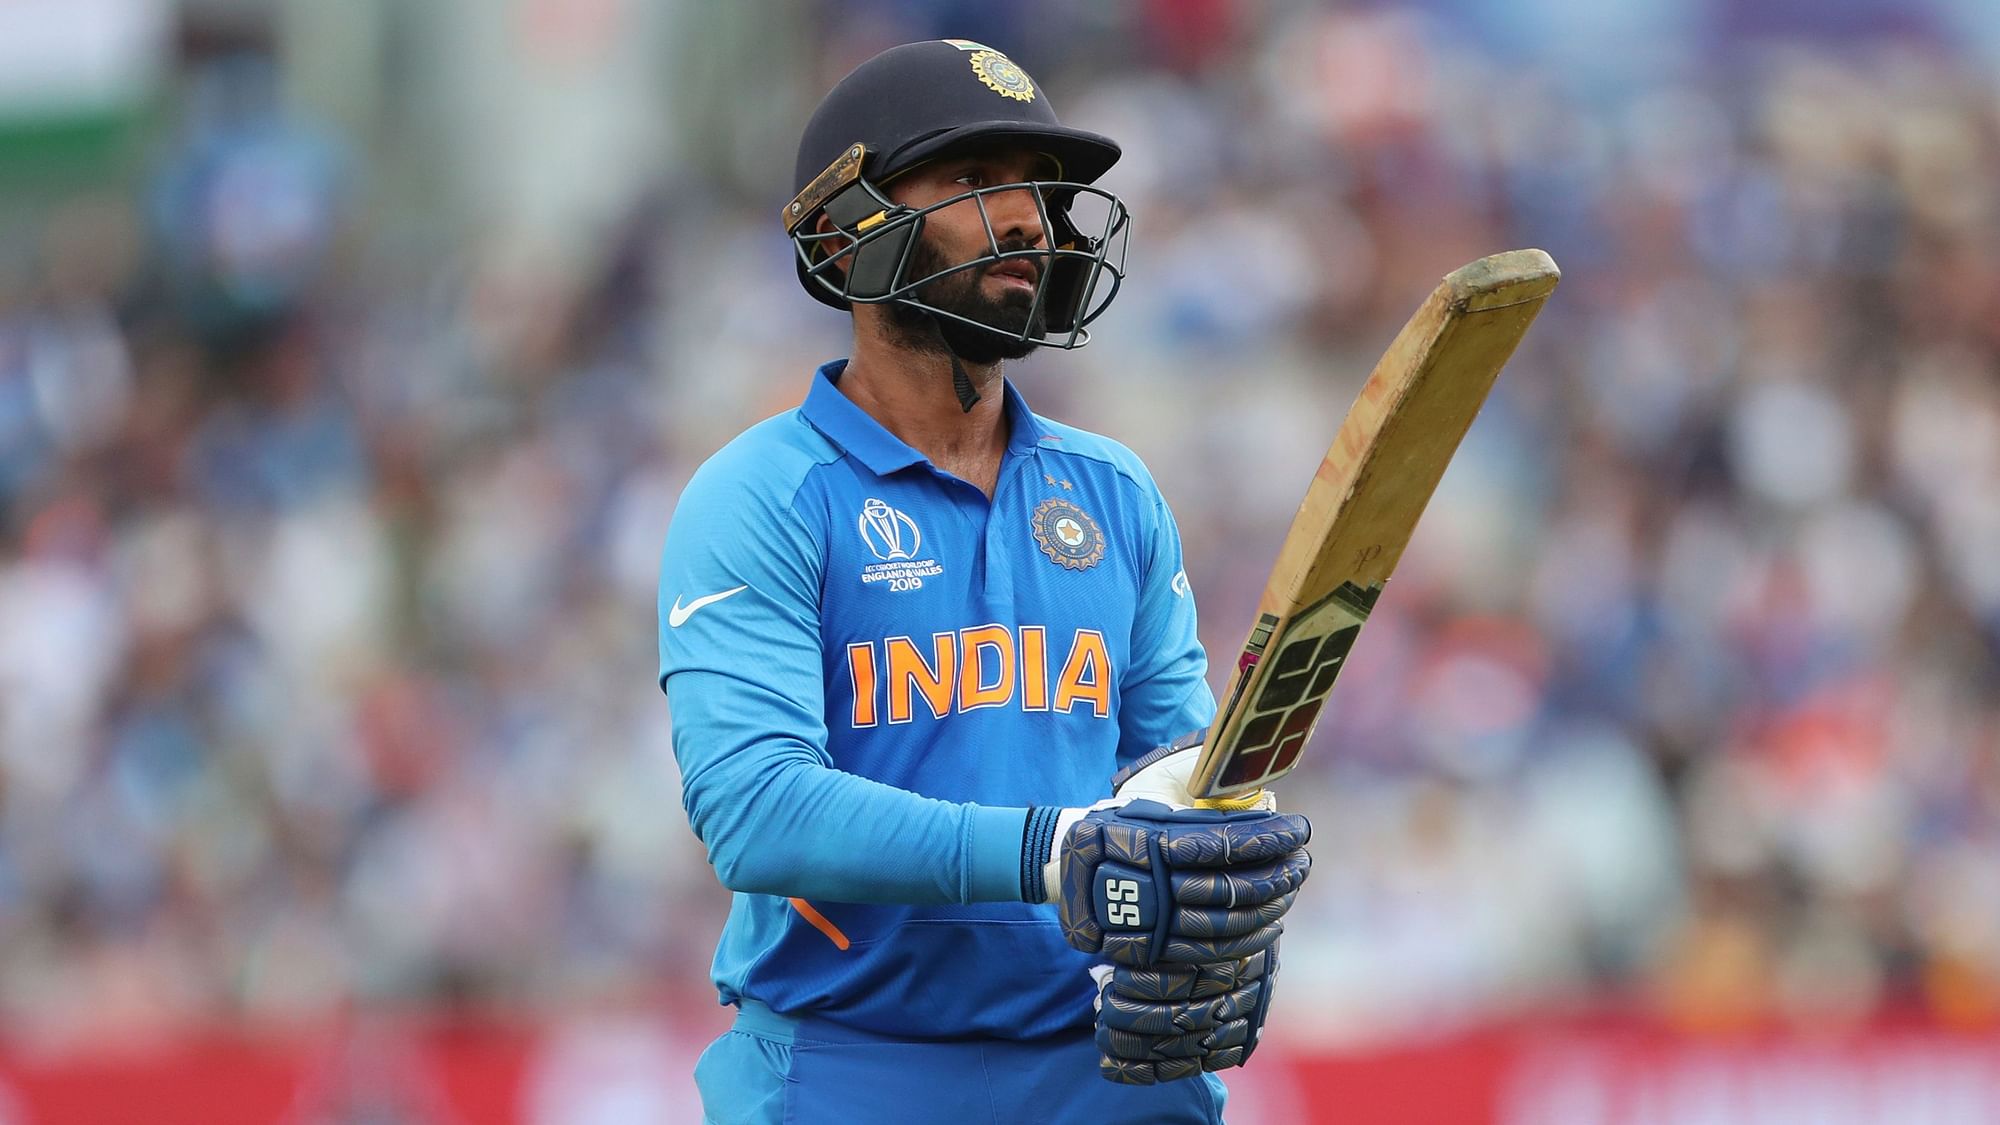 ndian cricketer Dinesh Karthik has tendered an “unconditional apology” for violating BCCI’s Central clause.